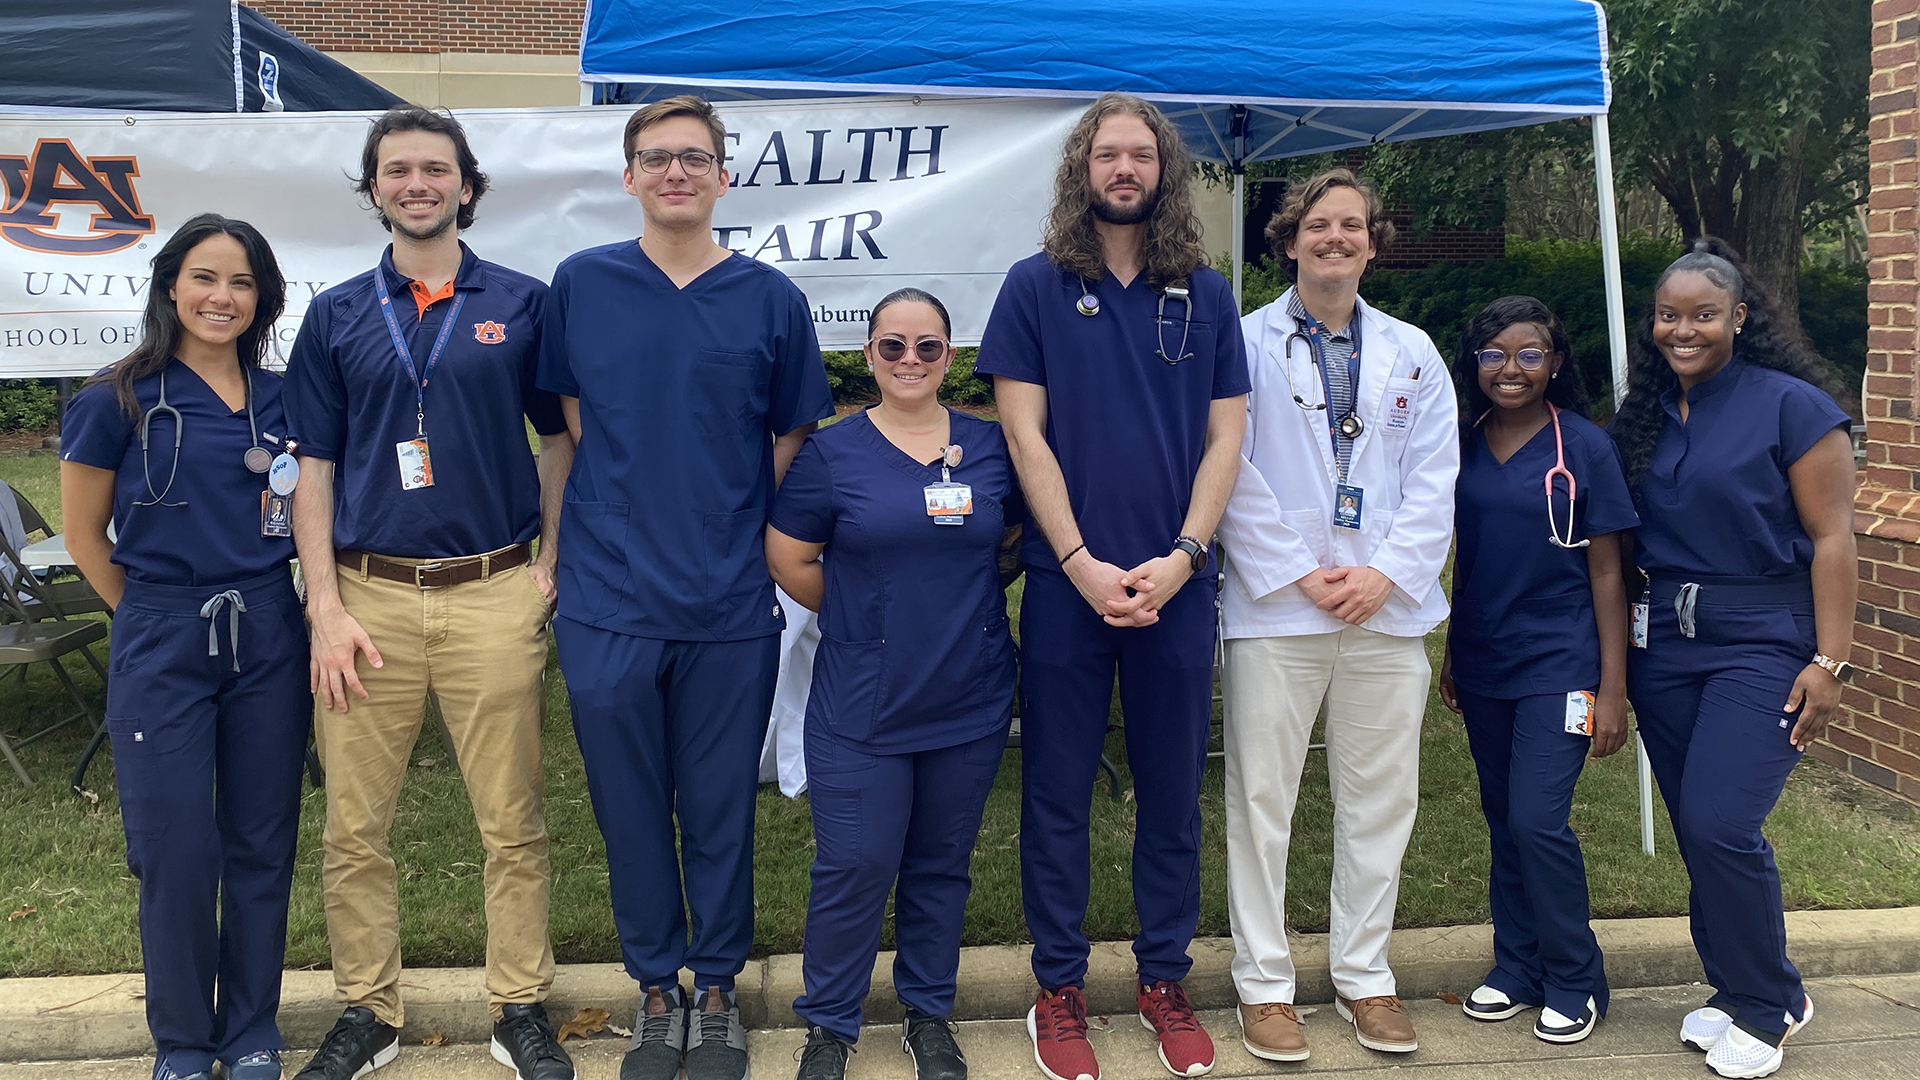 Students stand in front of tent at health fair